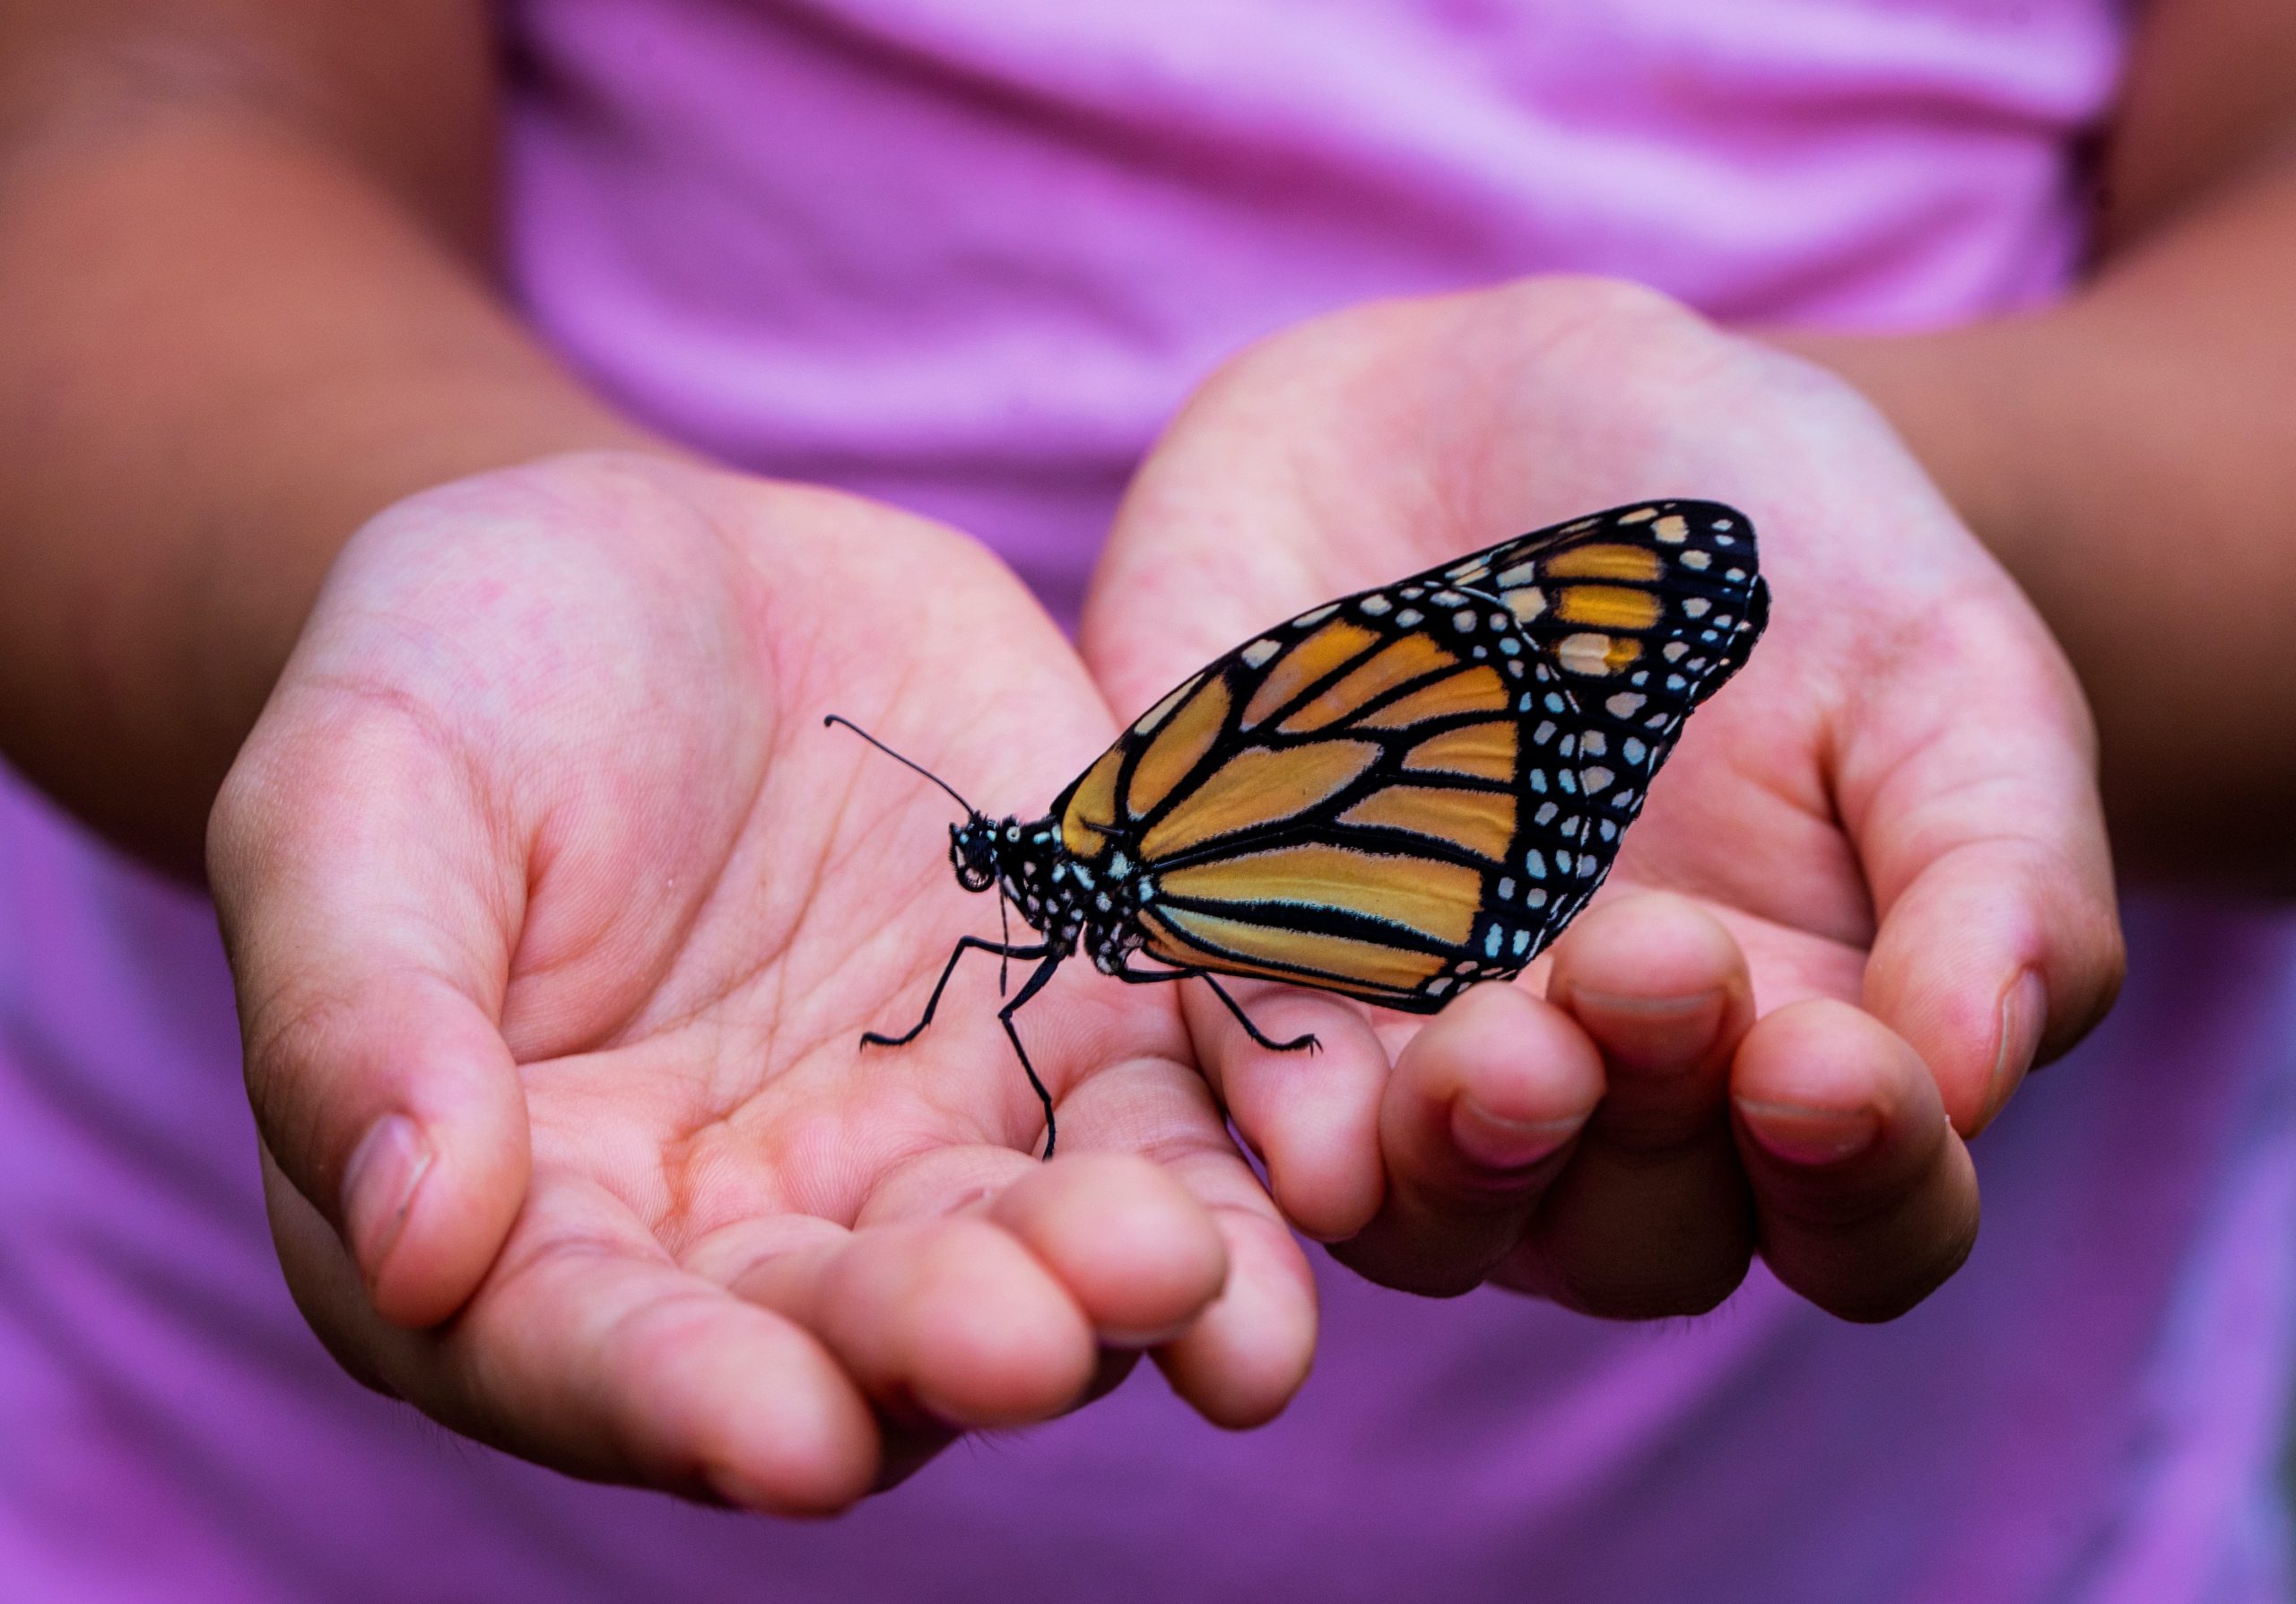 does it help monarch butterflies to raise them in captivity